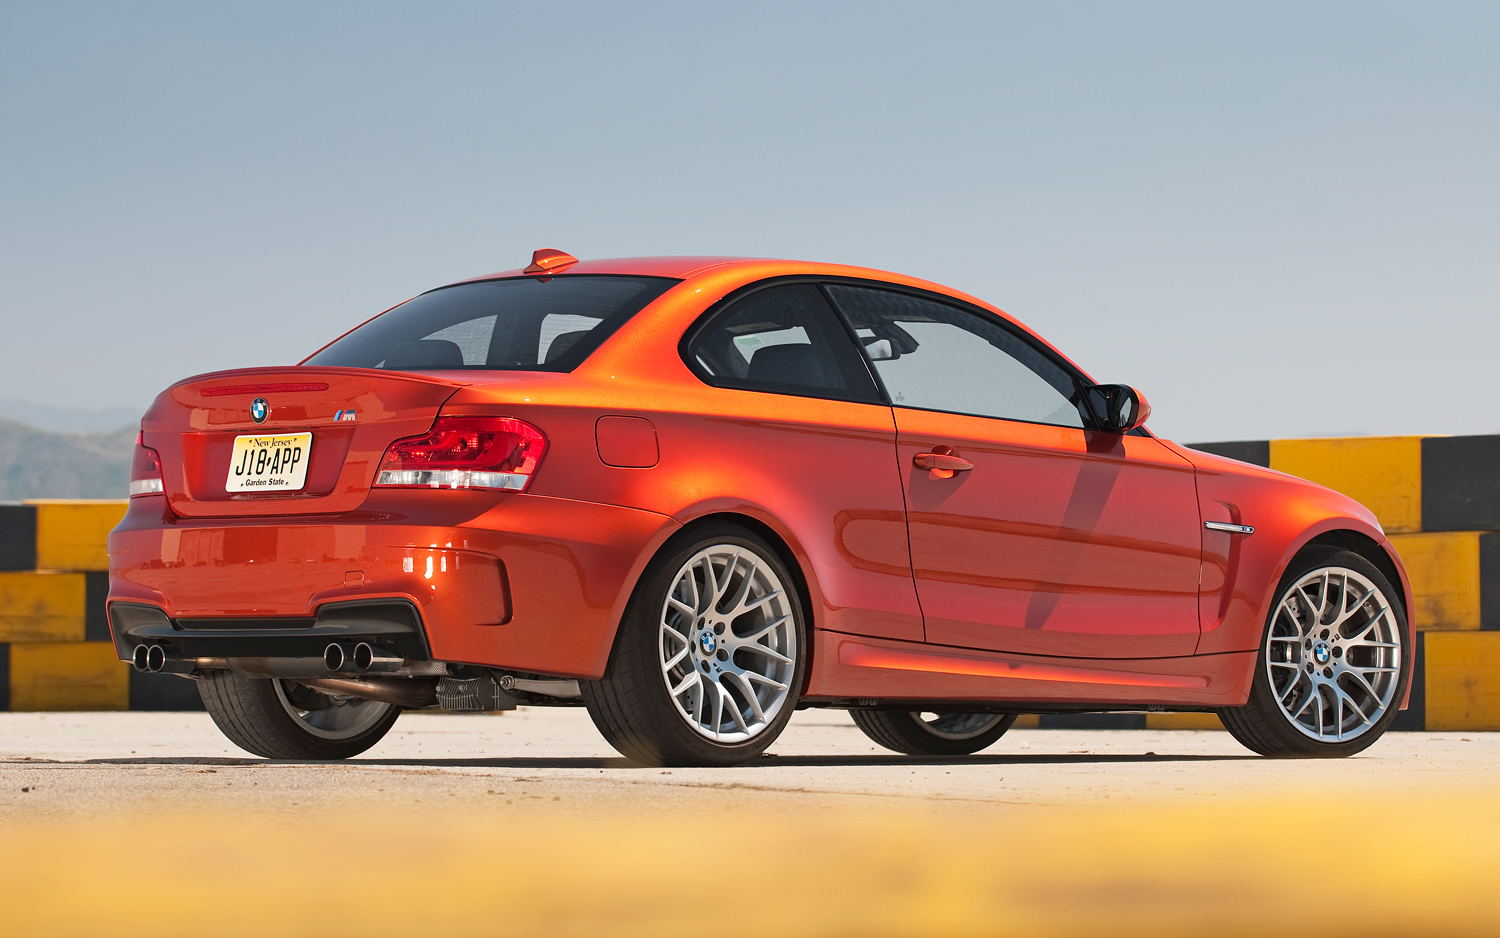 Amazing BMW 1 Series M Coupe Pictures & Backgrounds